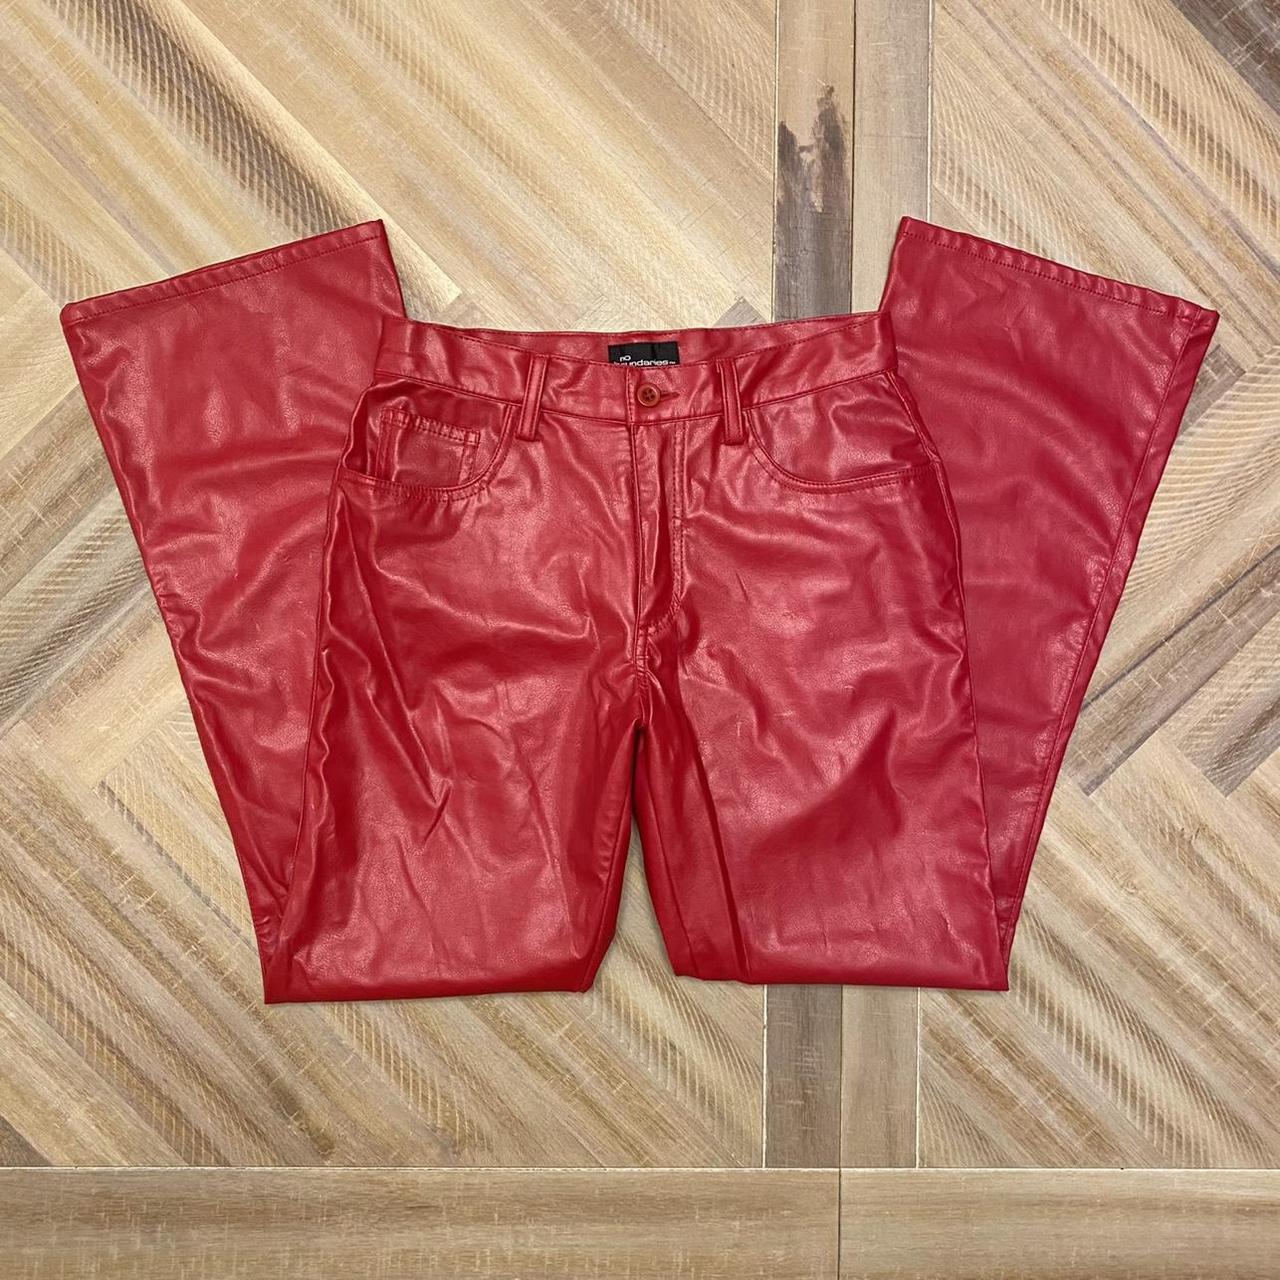 Vintage 90's y2k classic red faux leather pants by... - Depop